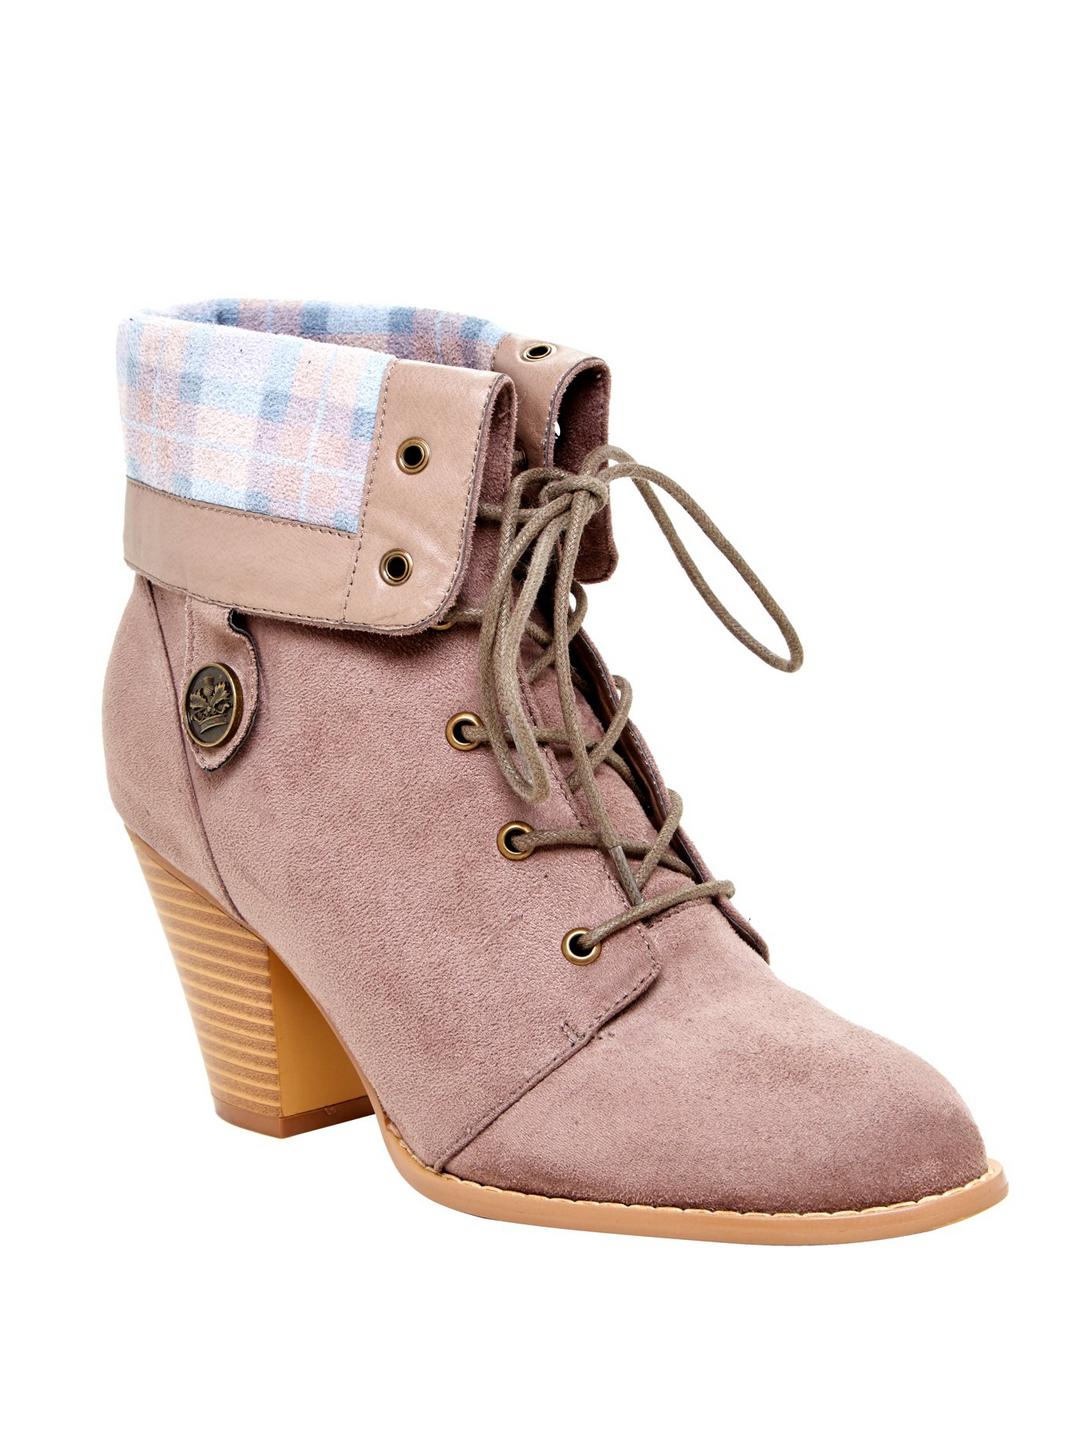 Outlander Tartan Taupe Lace-Up Heel Booties Hot Topic Exclusive, MULTI, hi-res